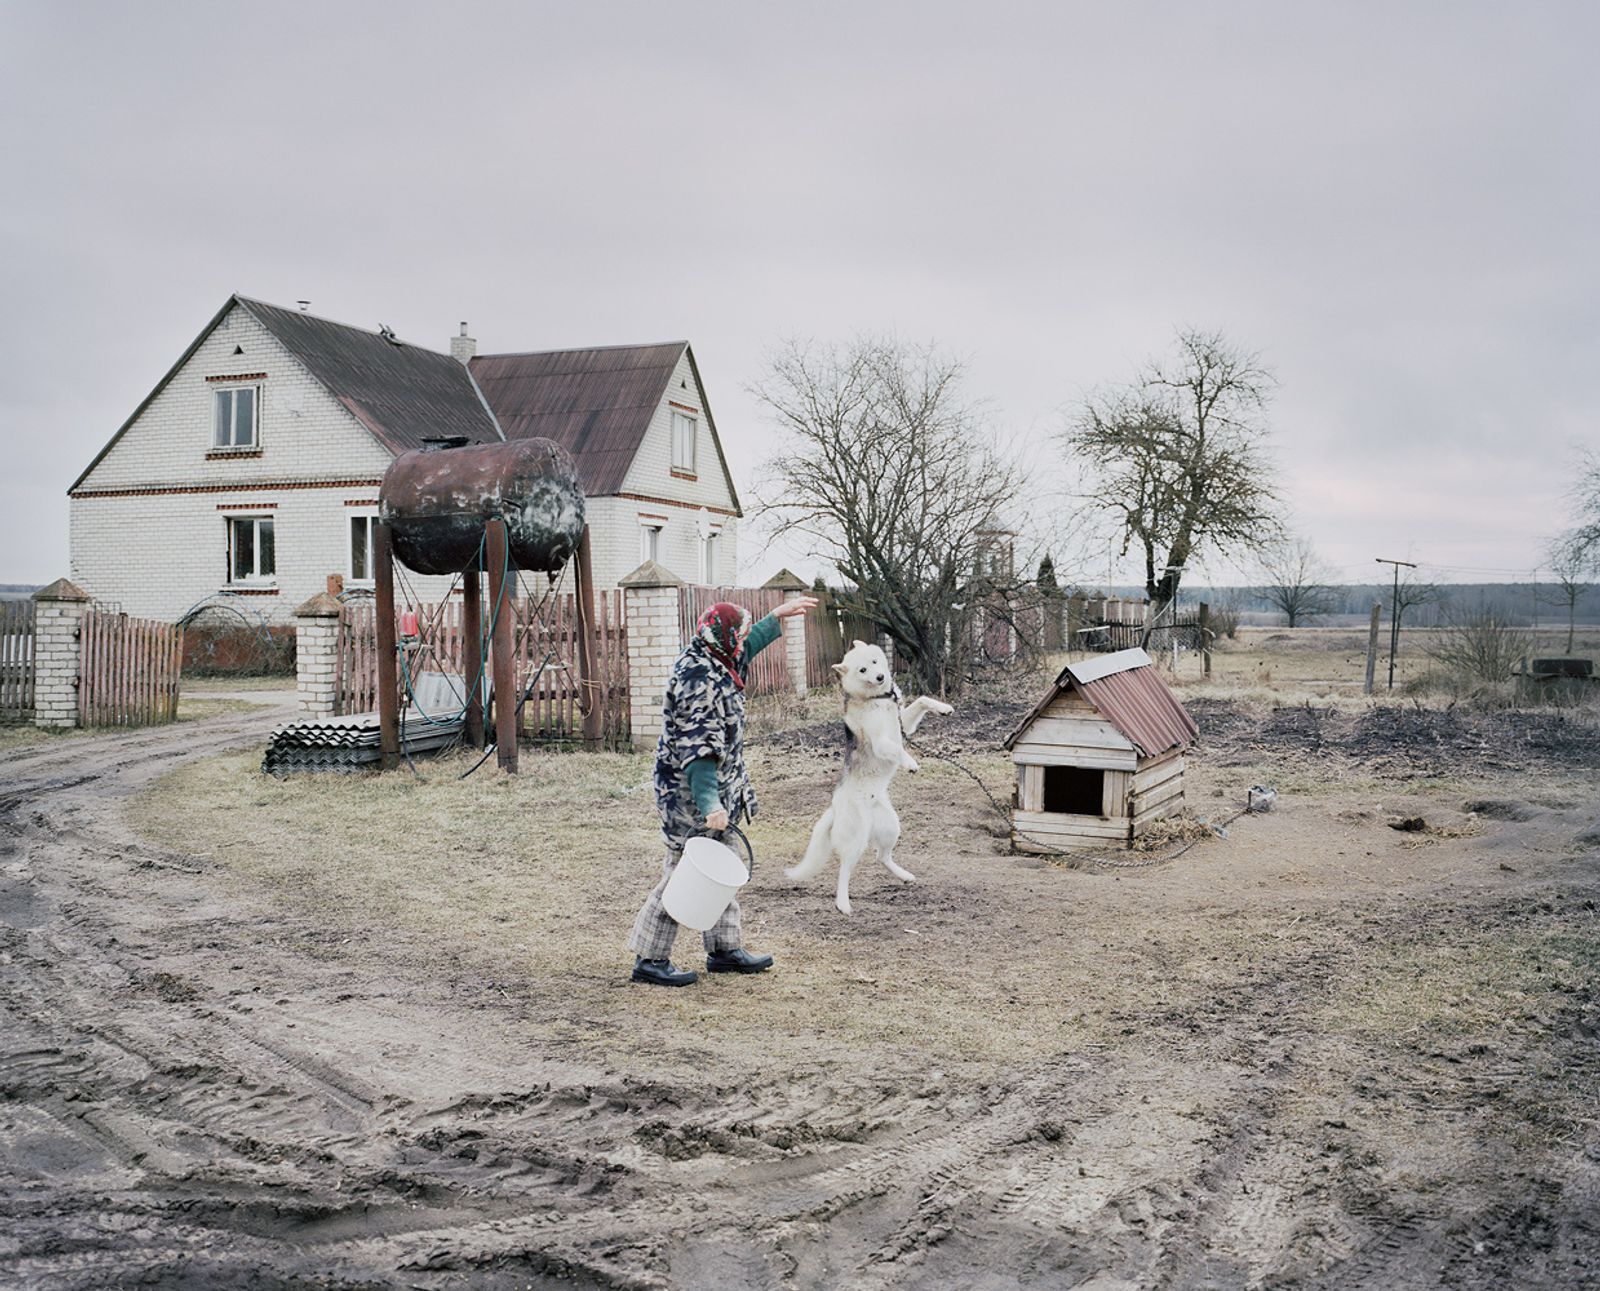 © Jasper  Bastian - Image from the A Road Not Taken photography project